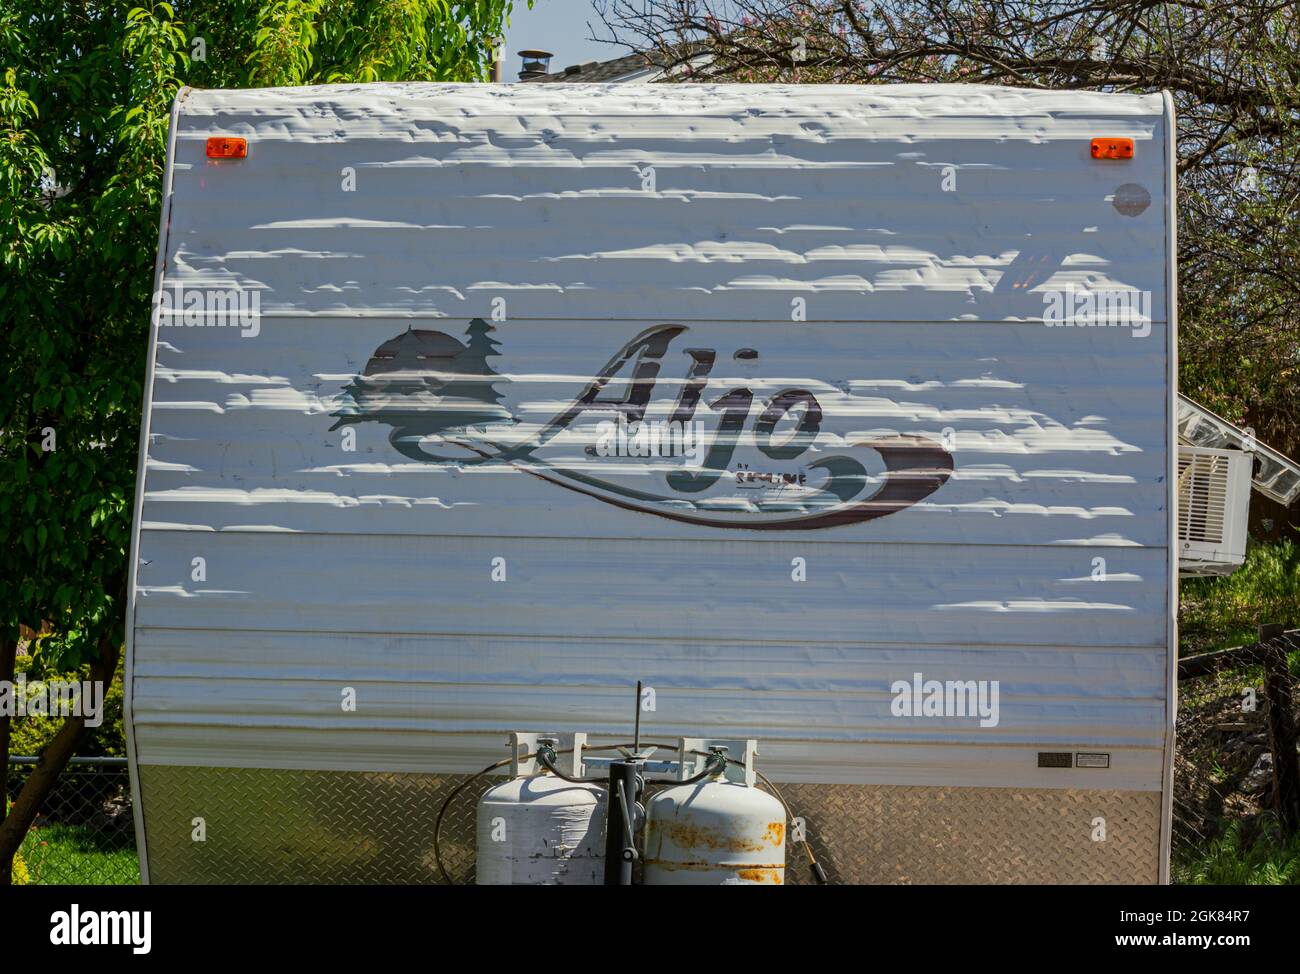 Hail damage from thunderstorm shows as dents to the aluminum exterior coating to older vacation trailer, Castle Rock Colorado USA. Photo taken in May. Stock Photo